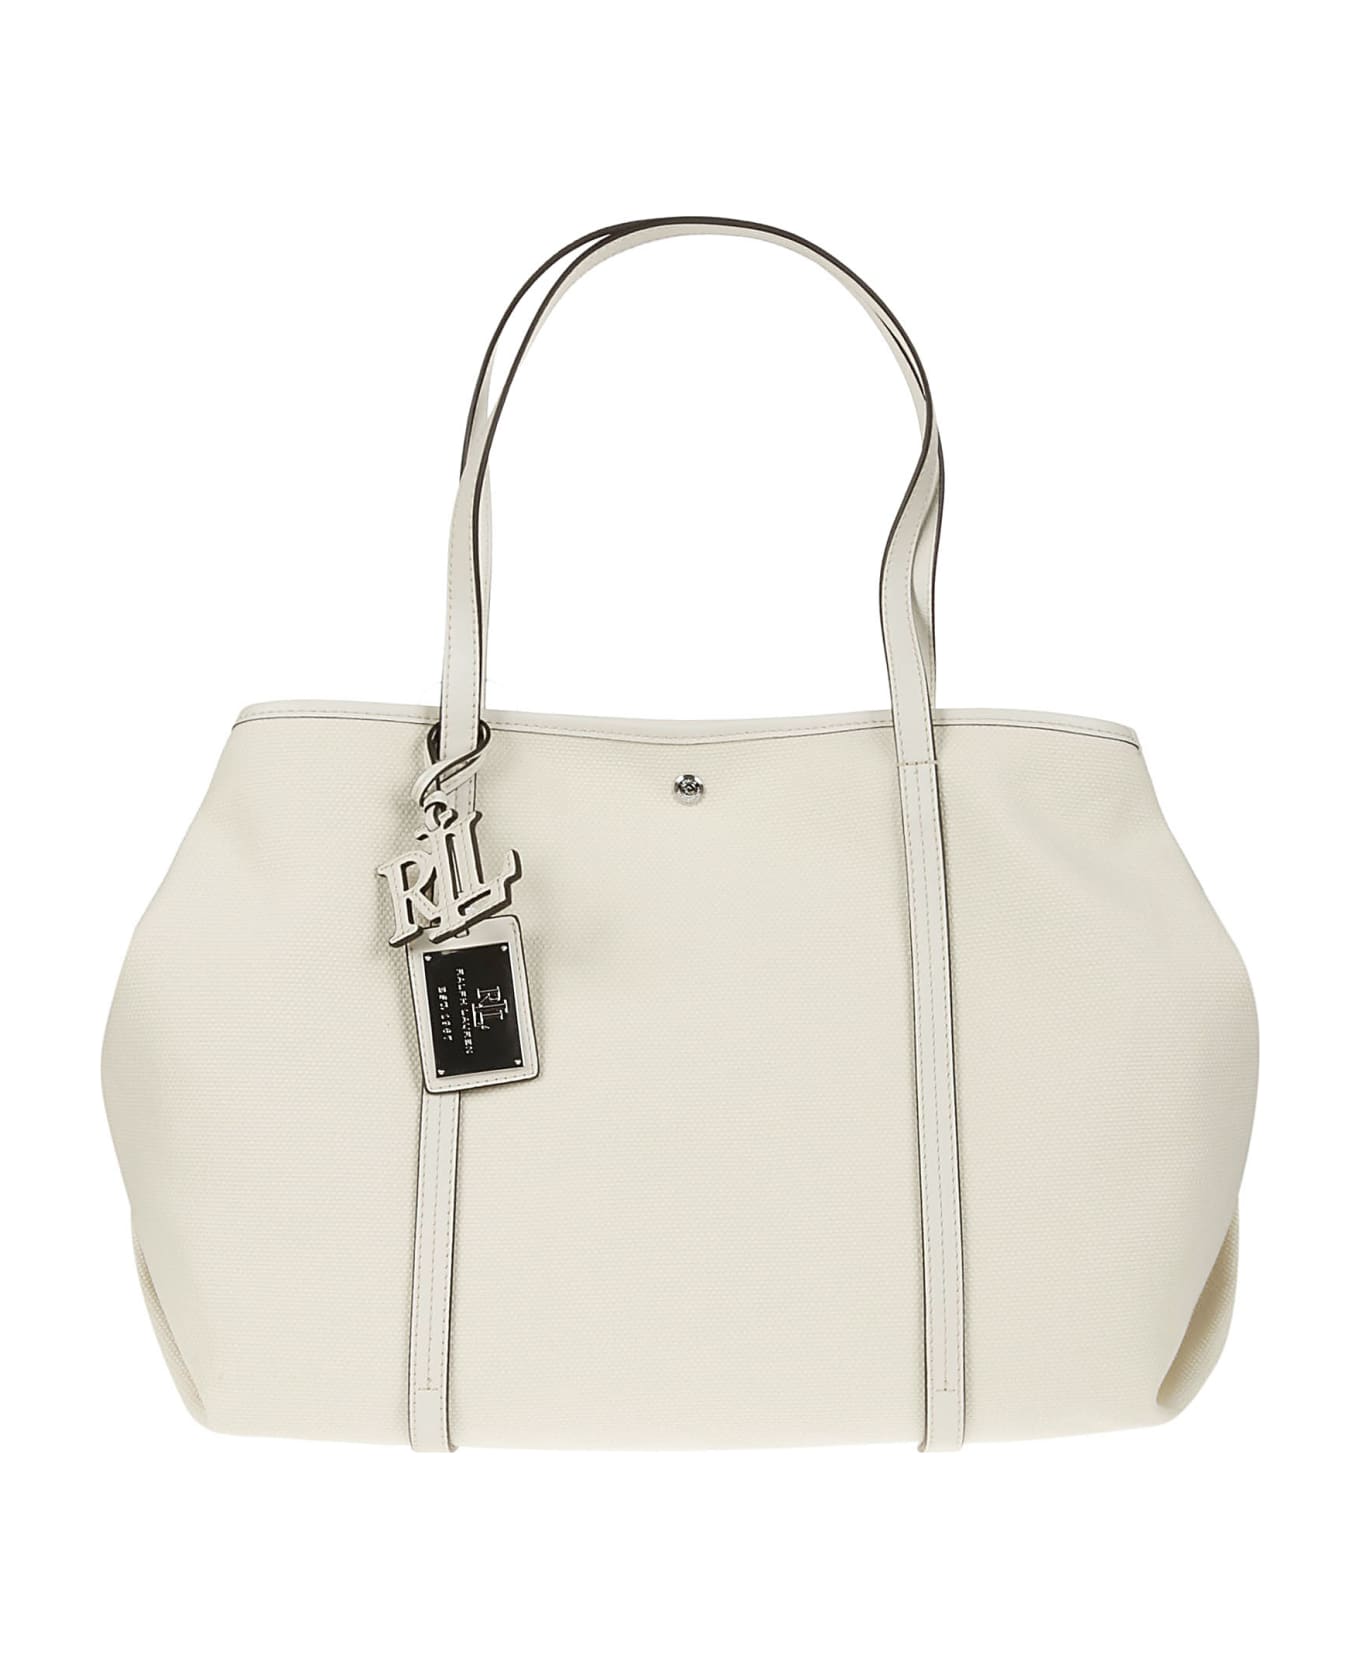 Ralph Lauren Emerie Tote Tote Extra Large - Natural Soft White/soft White